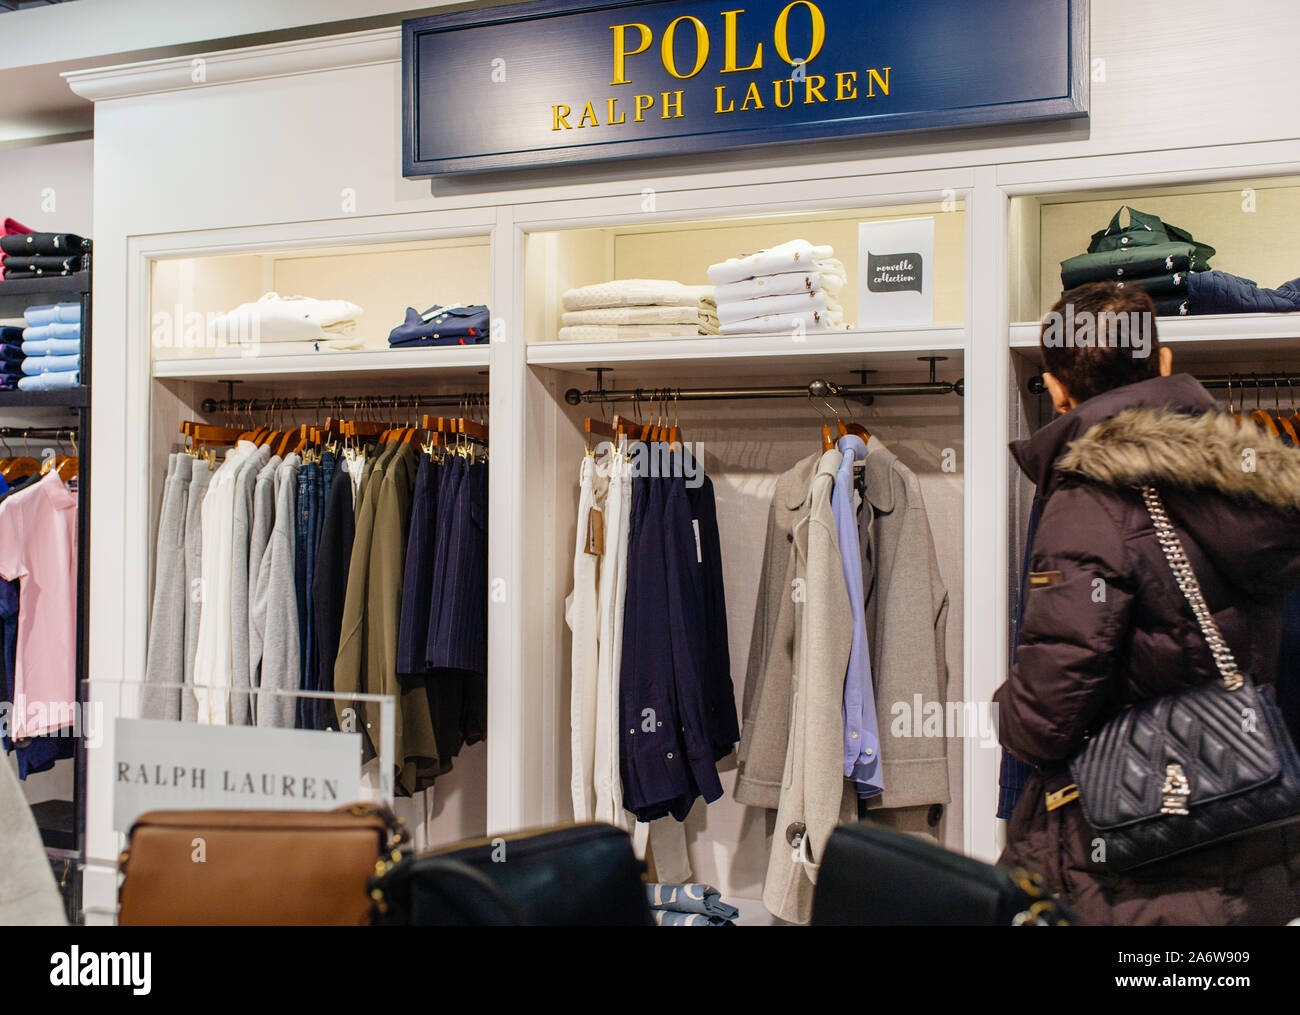 Boutique Ralph Lauren High Resolution Stock Photography and Images - Alamy